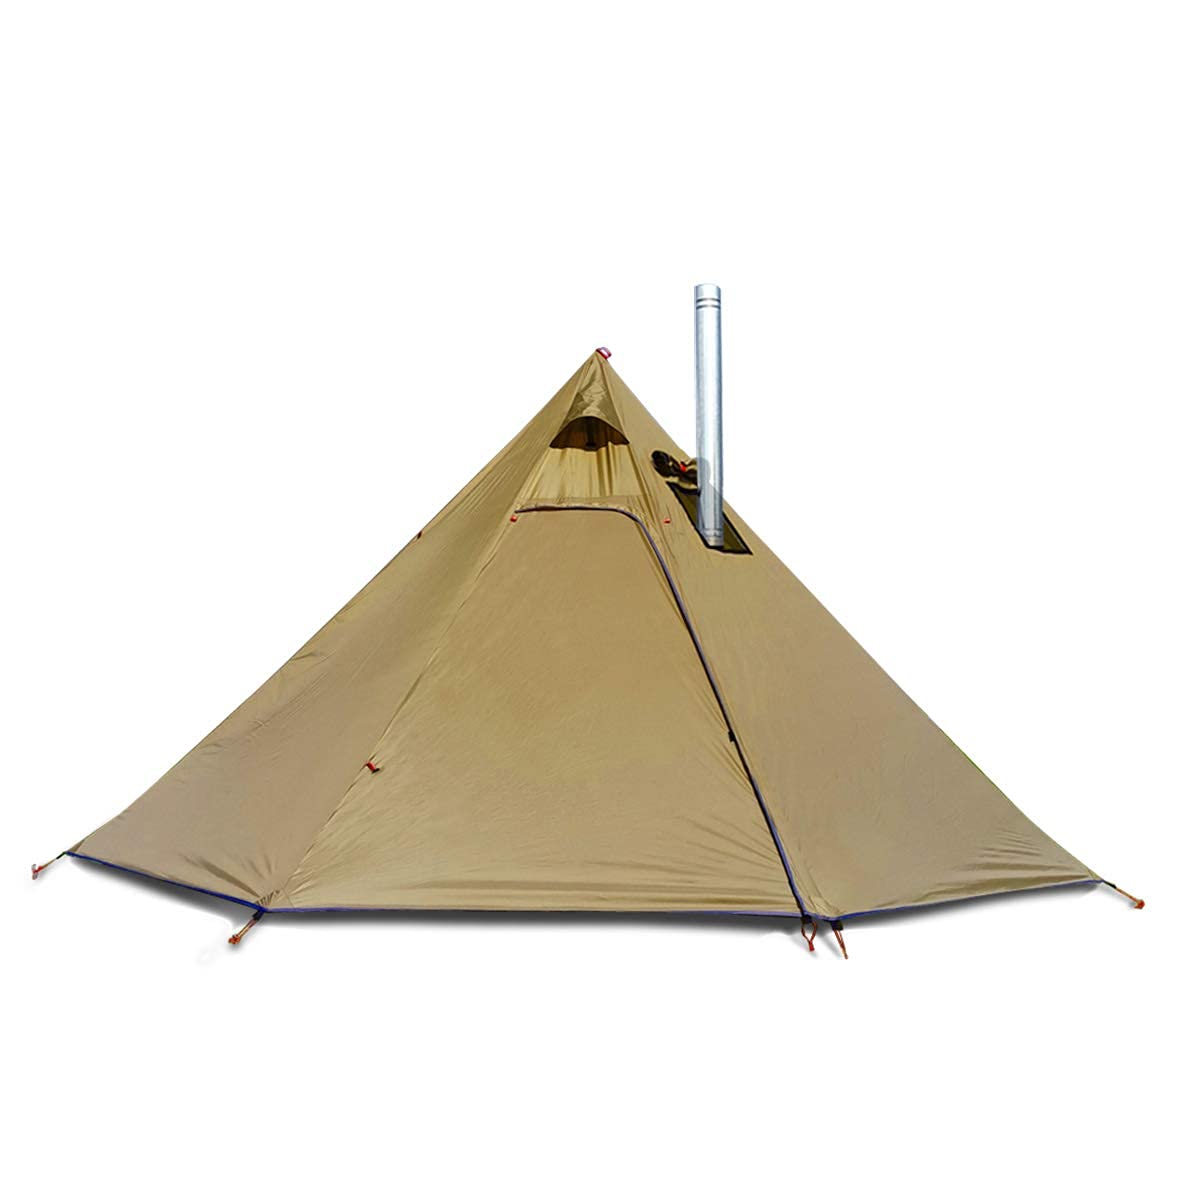 Preself T1 Teepee Tent with Stove Jack